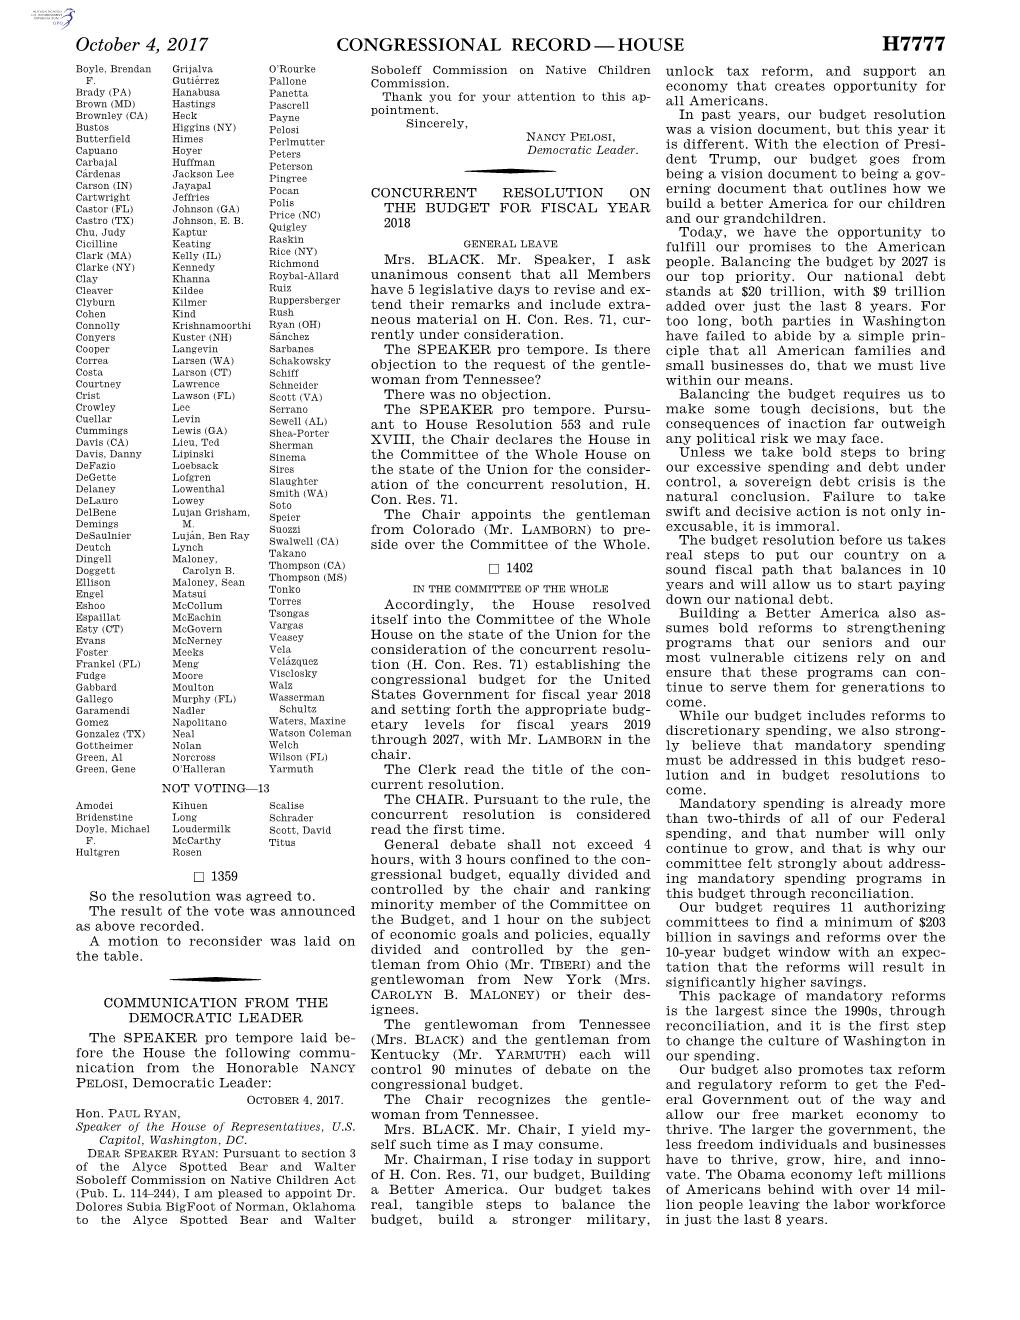 Congressional Record—House H7777